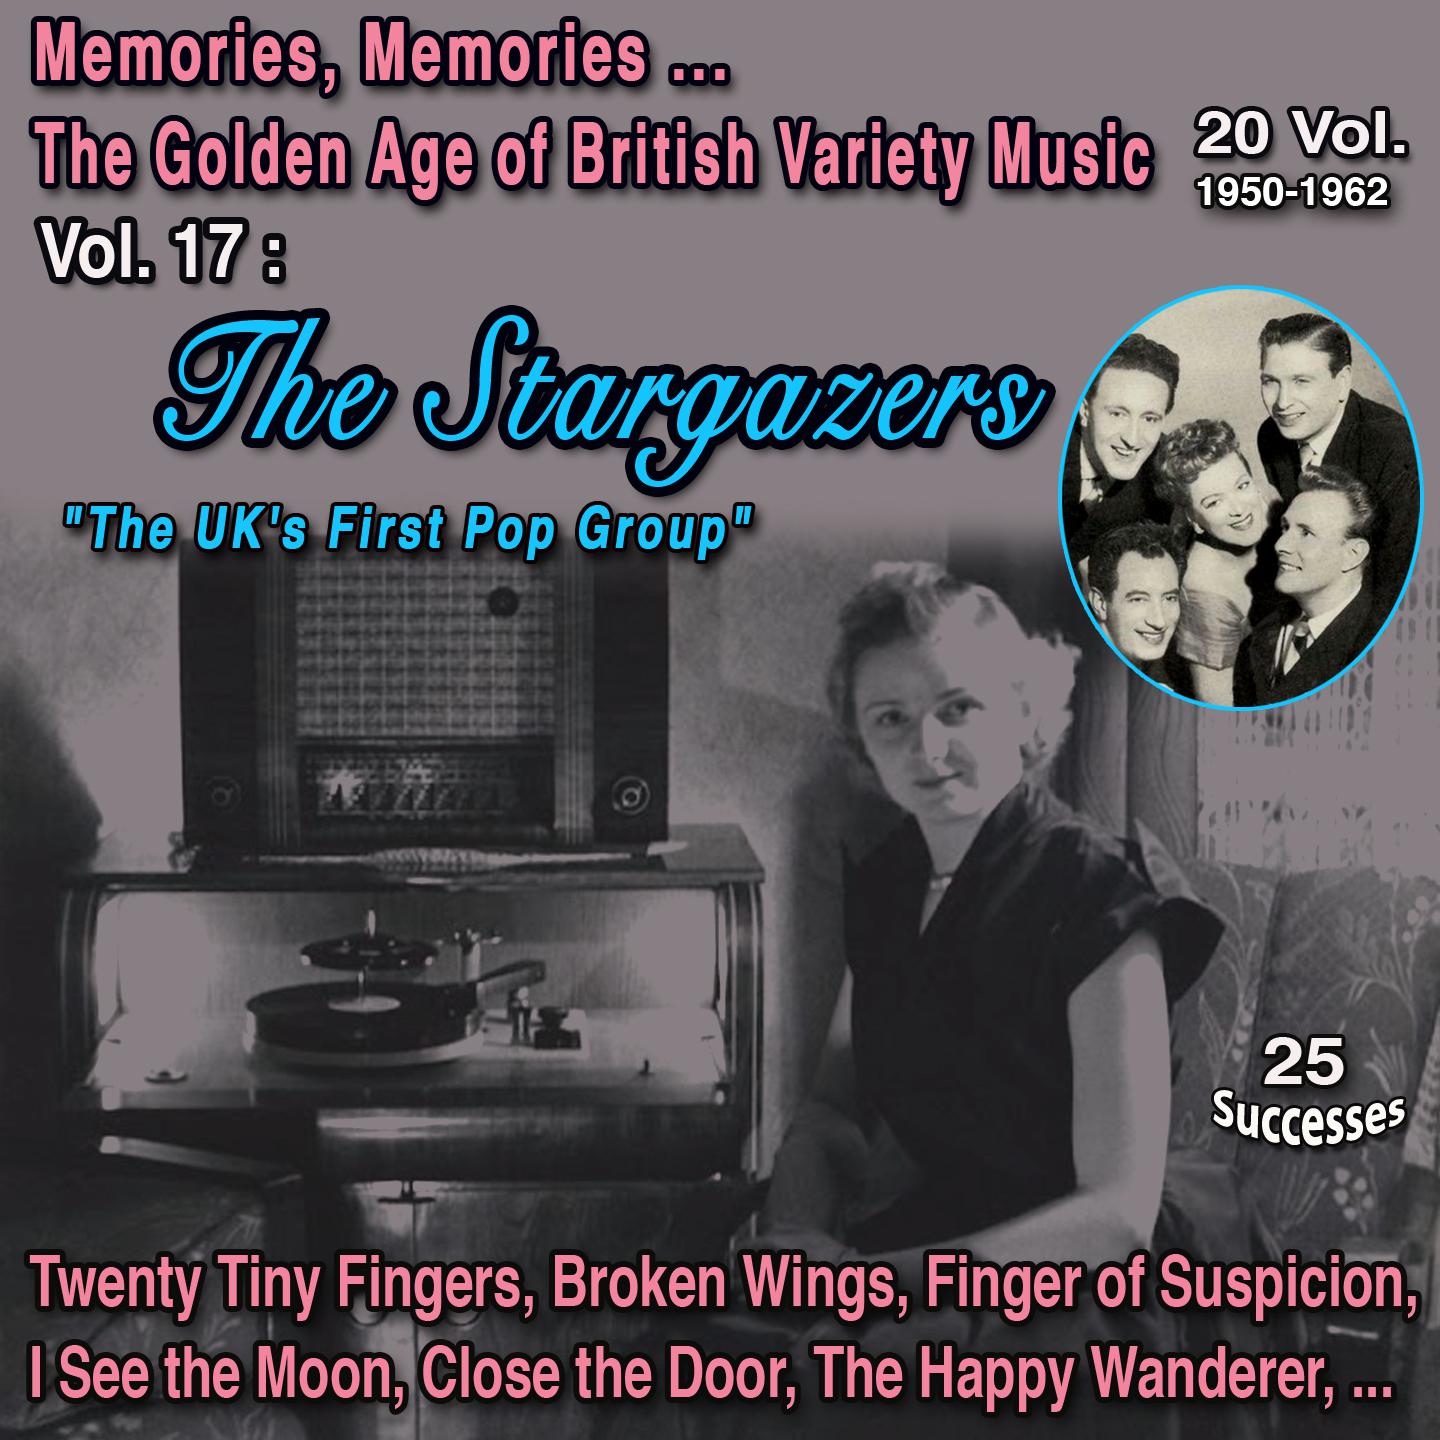 Постер альбома Memories, Memories... The Golden Age of British Variety Music 20 Vol. - 1950-1962 Vol. 17 : The Stargazers "The UK's First Pop Group"